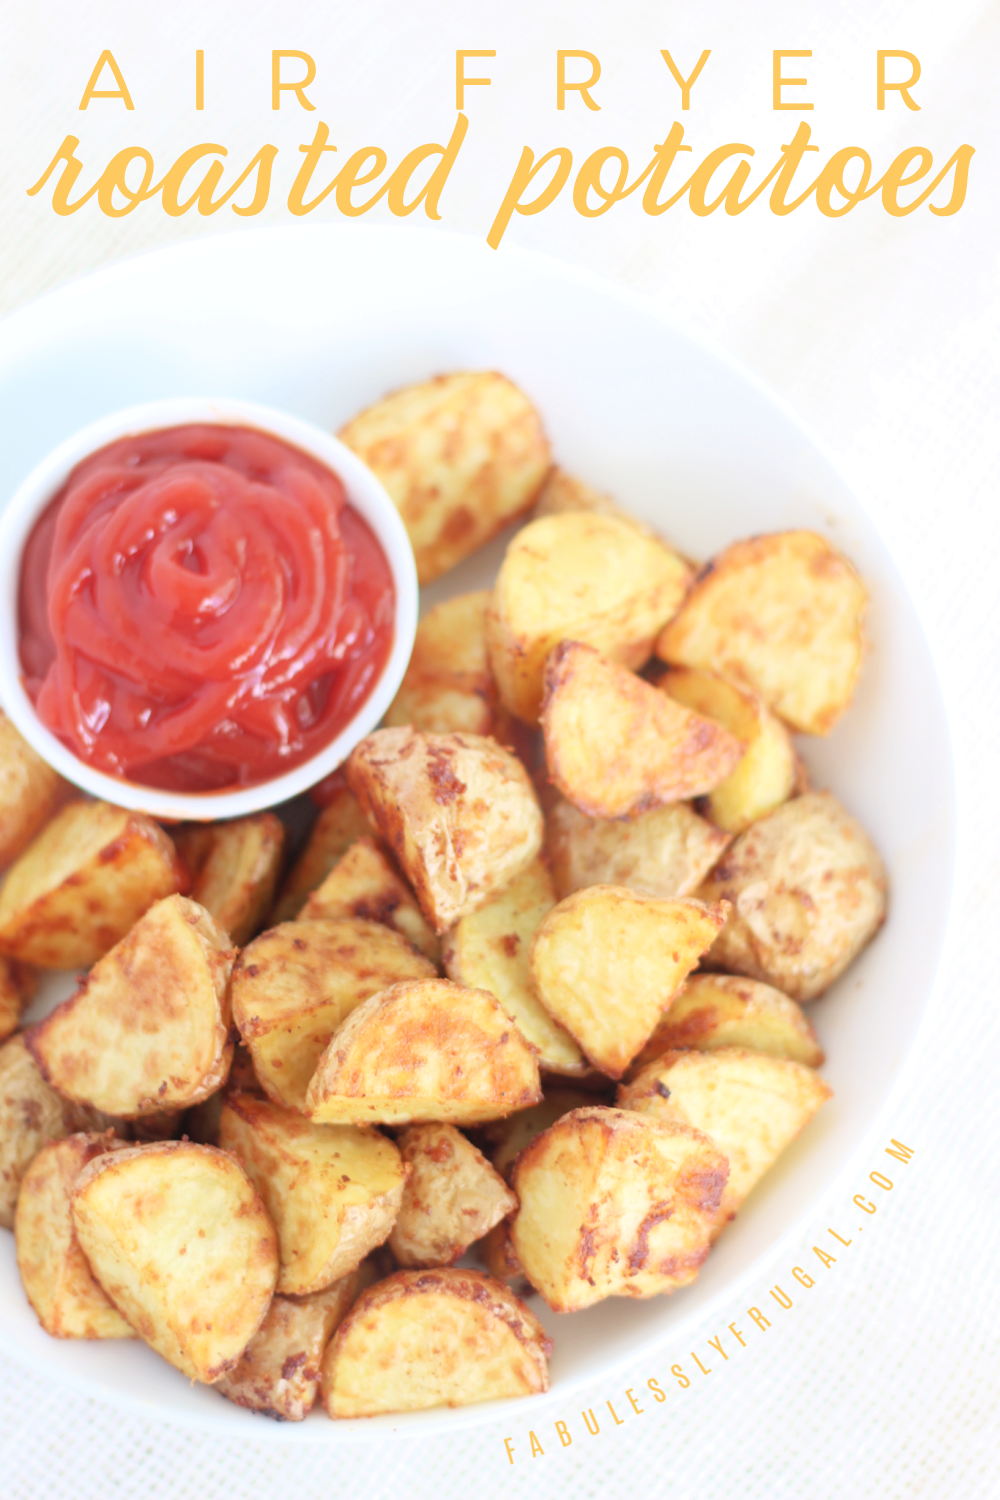 fast air fryer roasted potatoes